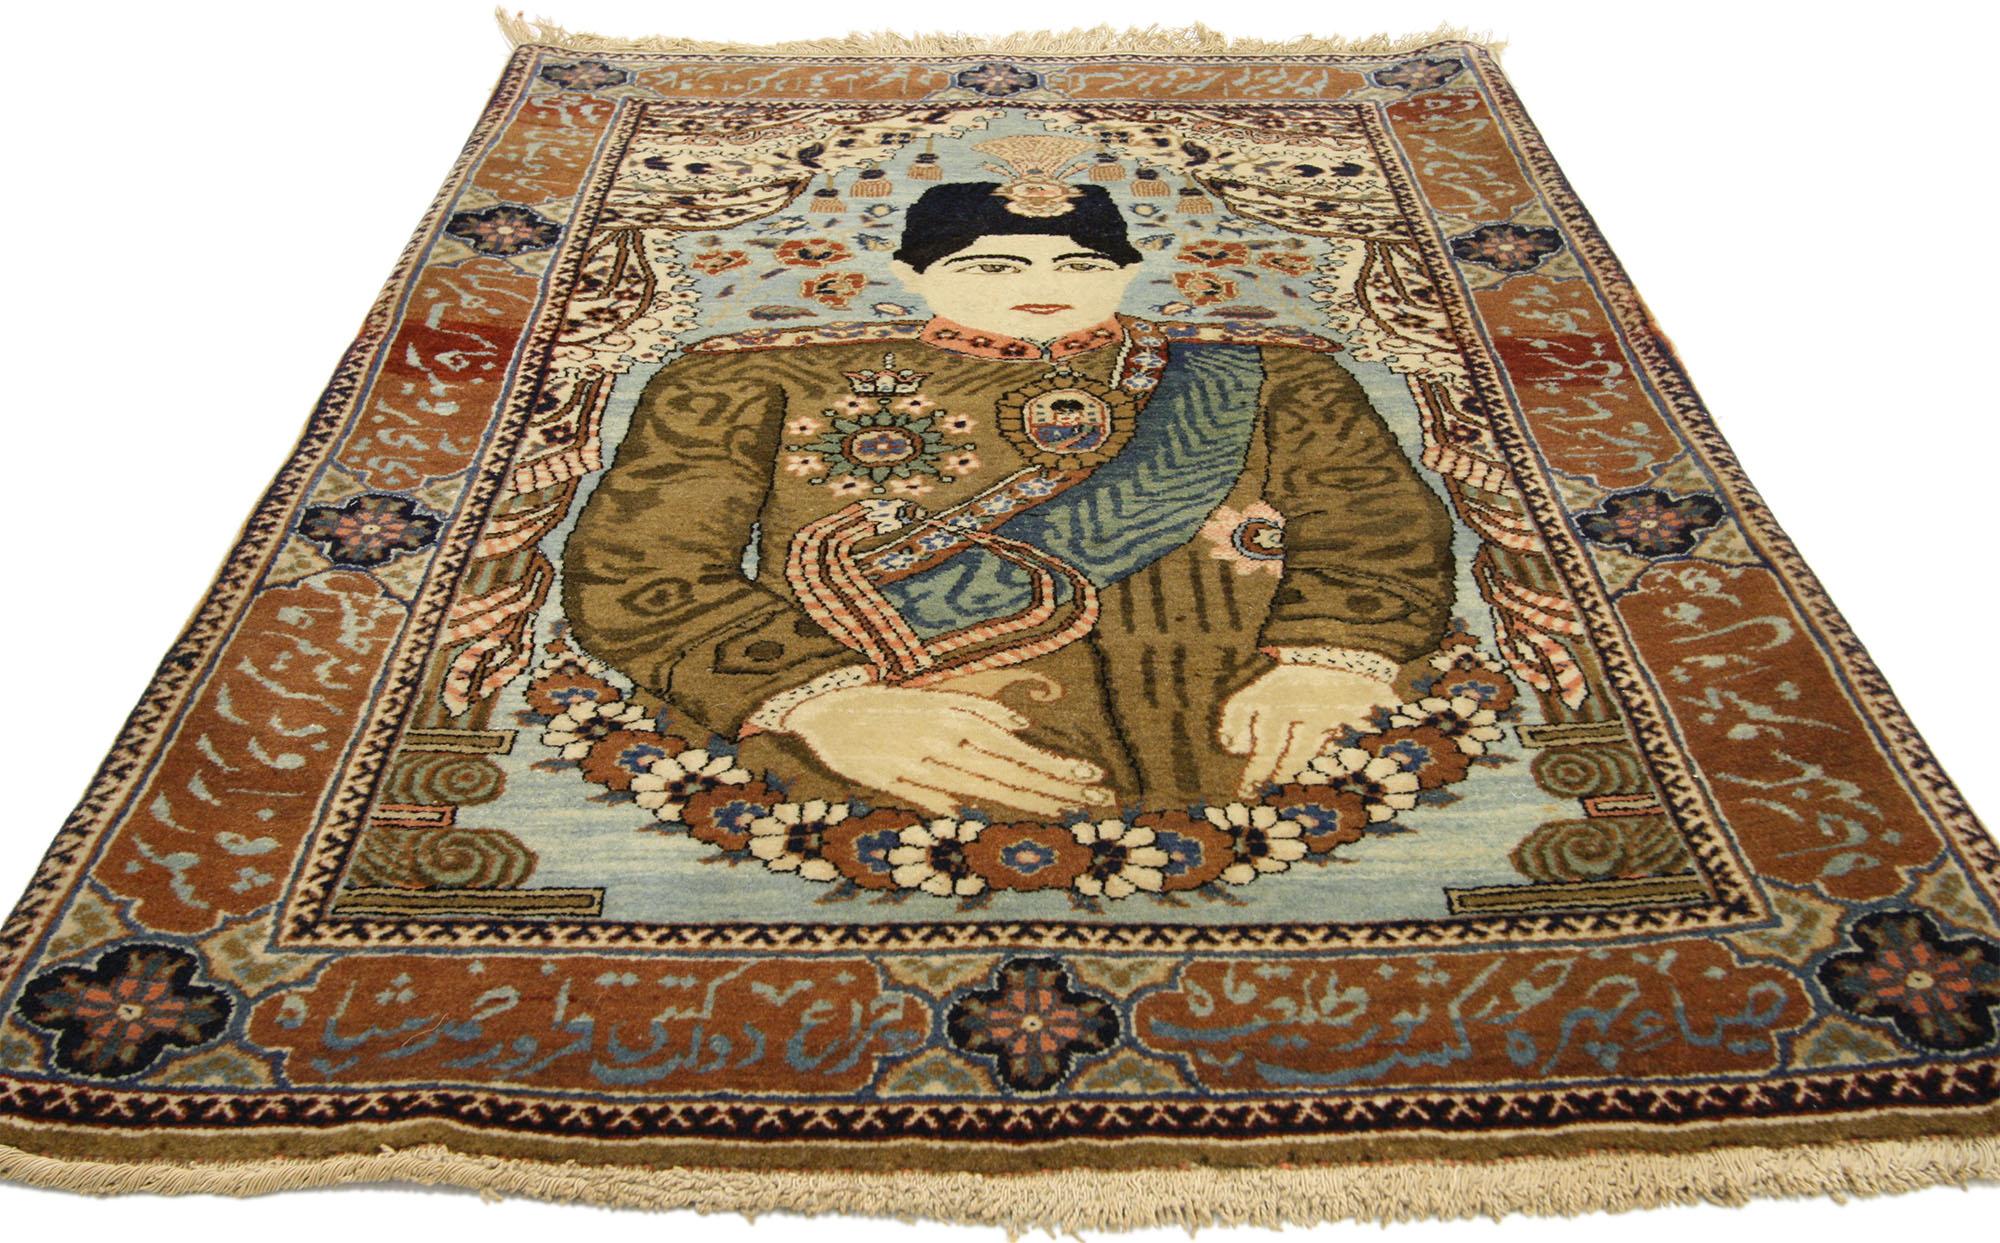 77162 Antique Persian Mohtasham Kashan Pictorial Rug, 02'00 x 03'00. 
Signed by the esteemed master weaver, Mohtasham Kashan, behold this exquisite hand-knotted wool antique Kashan pictorial rug. A true masterpiece, it proudly showcases the regal